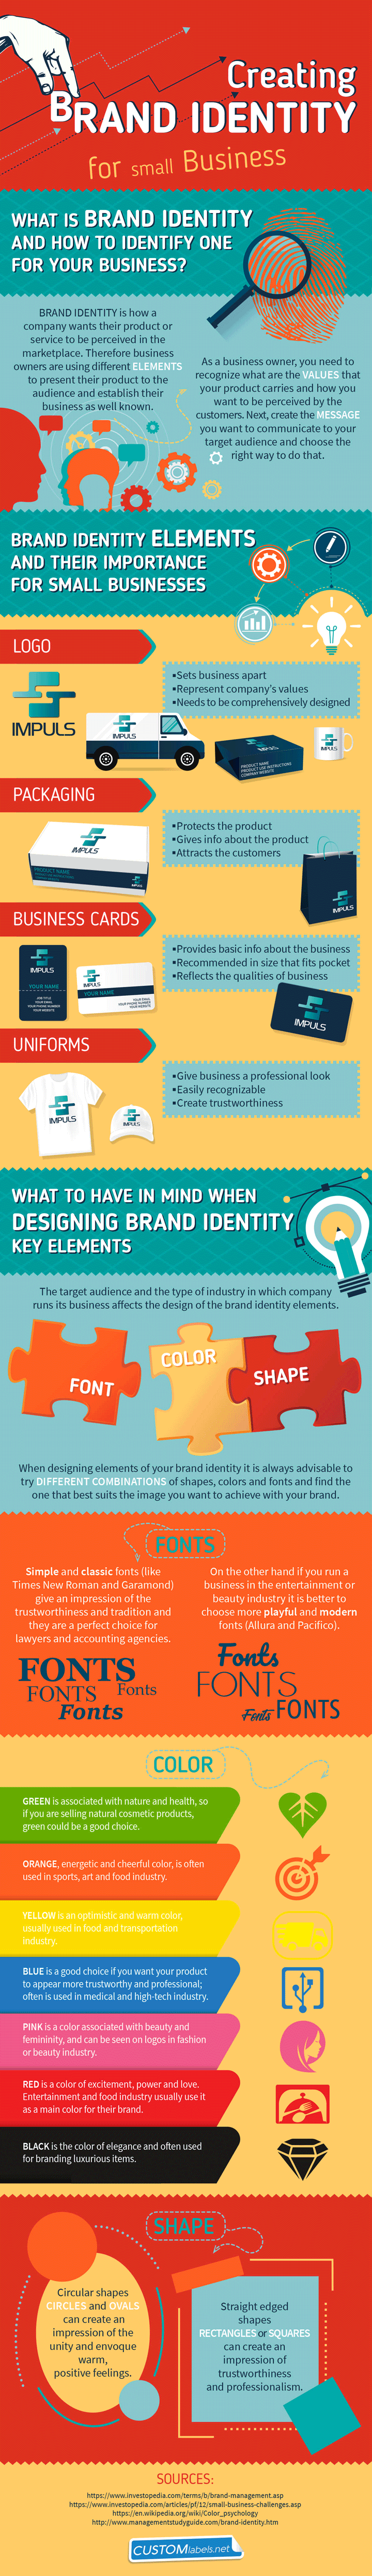 brand identity for your small business infographic